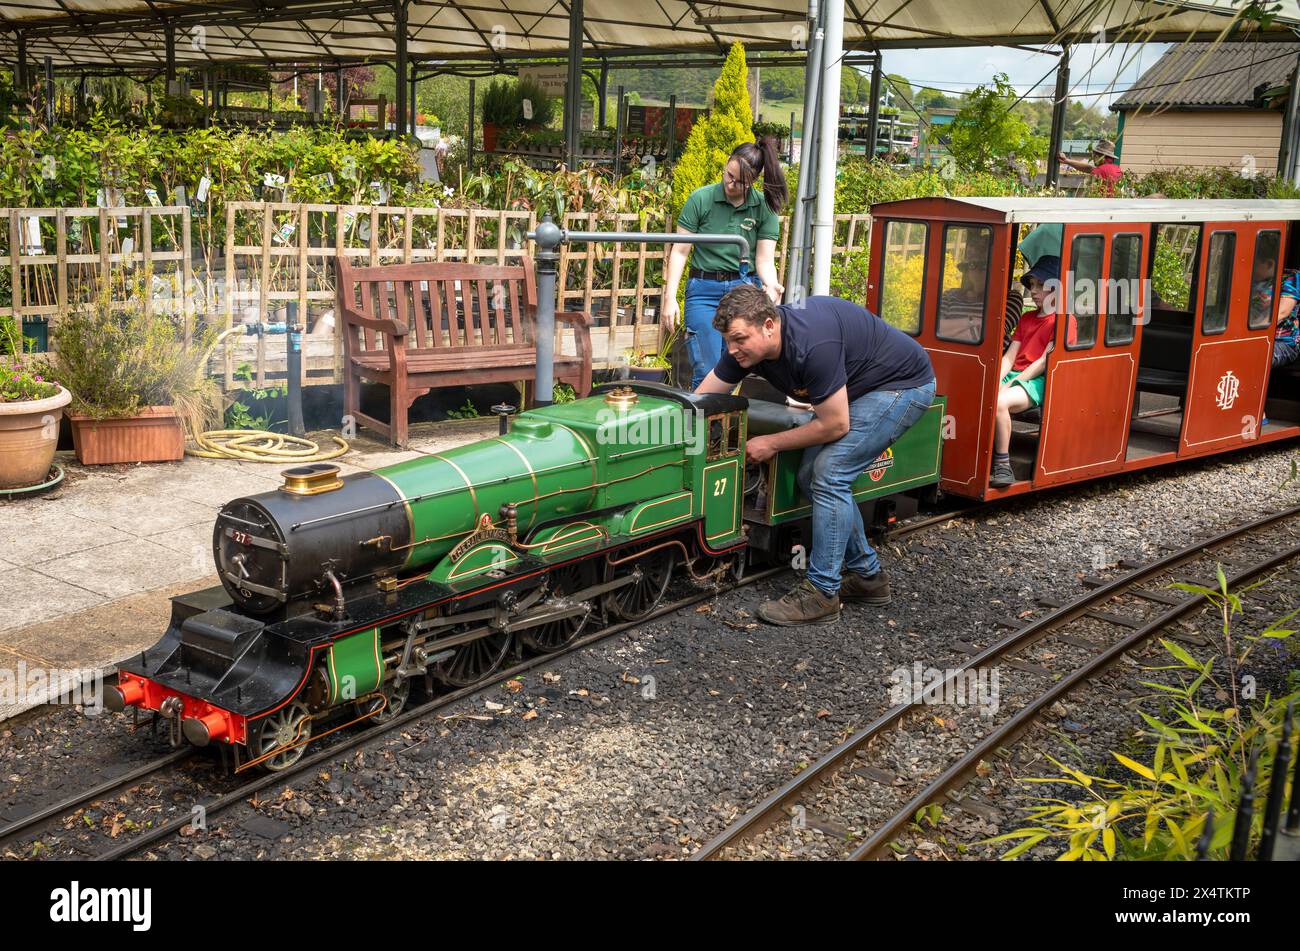 Volunteers ready The Railway Mission minature steam locomotive and its carriages at South Downs Light Railway, Pulborough, UK Stock Photo